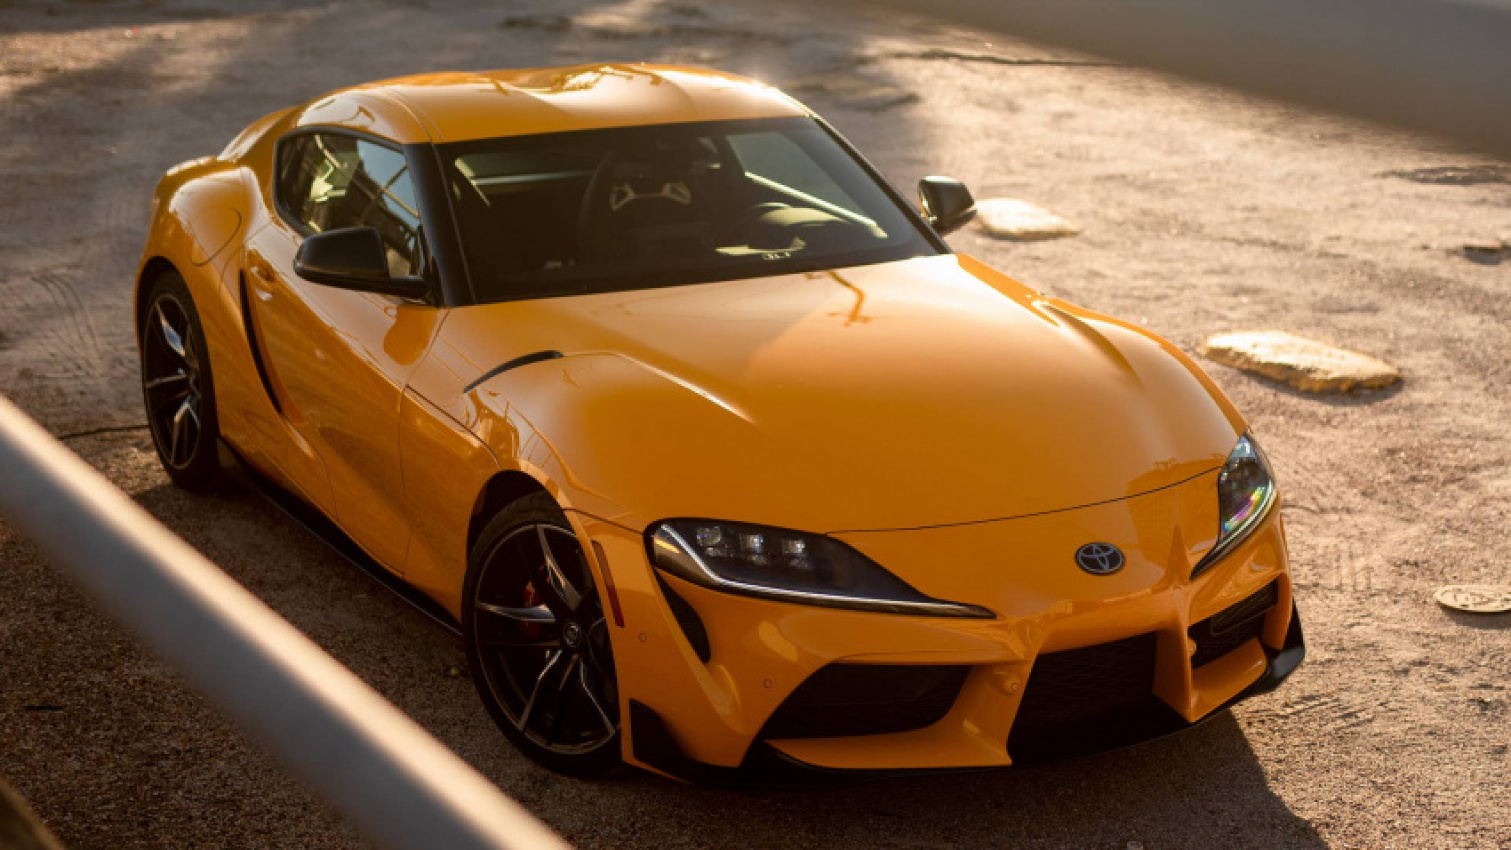 image 2023 toyota supra with a six speed manual will debut april 28 report 164667988651678